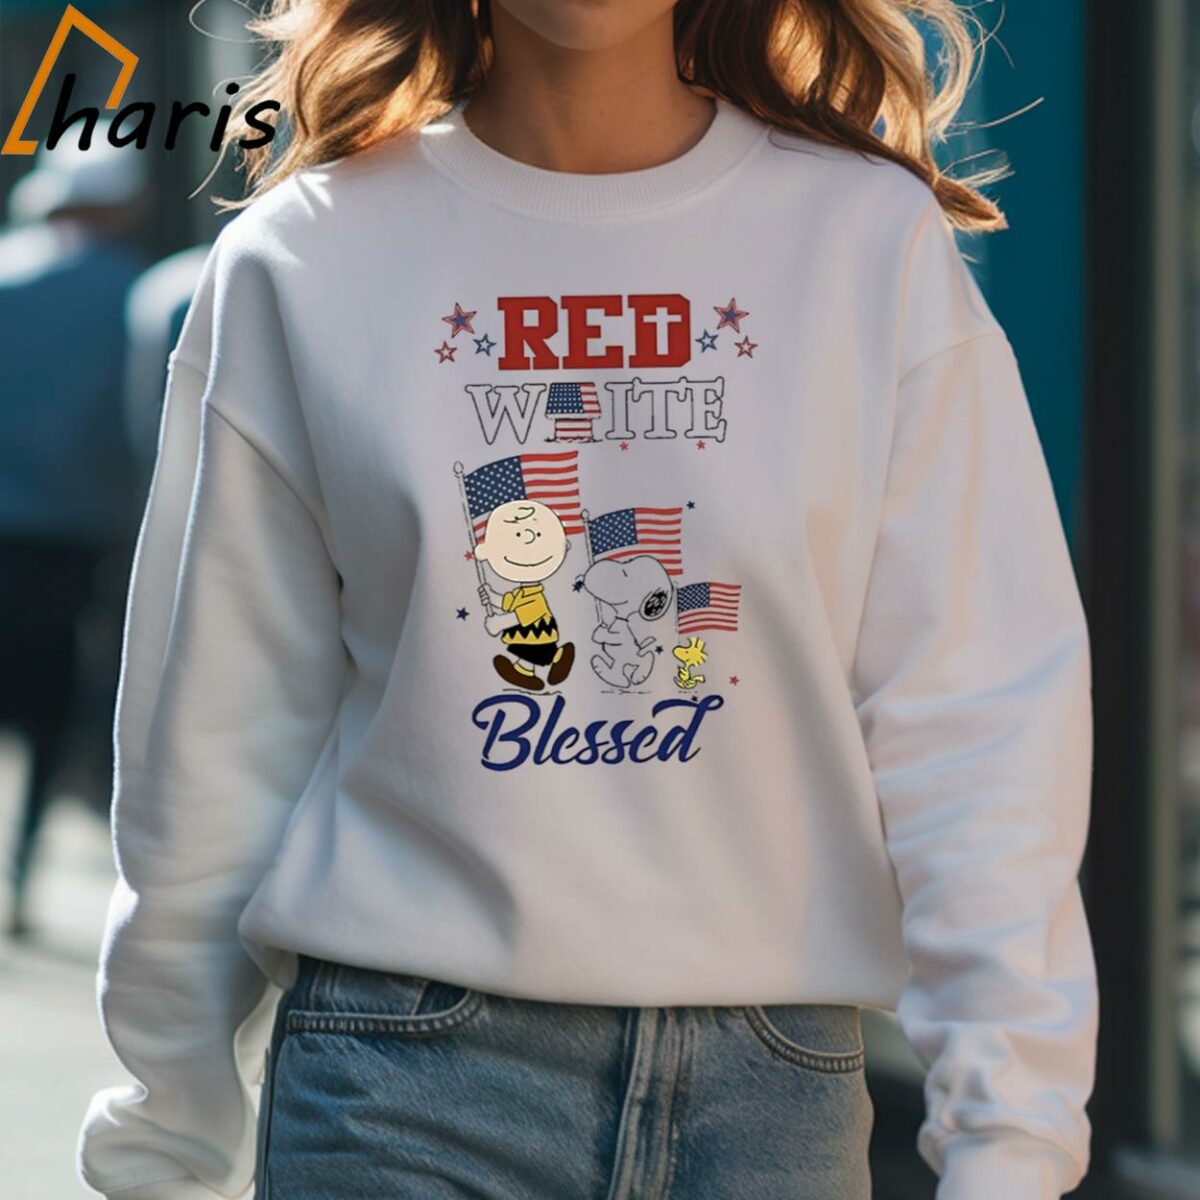 Snoopy Charlie Brown Peanuts The Independence Day Red White Blessed T shirt 4 Sweatshirt